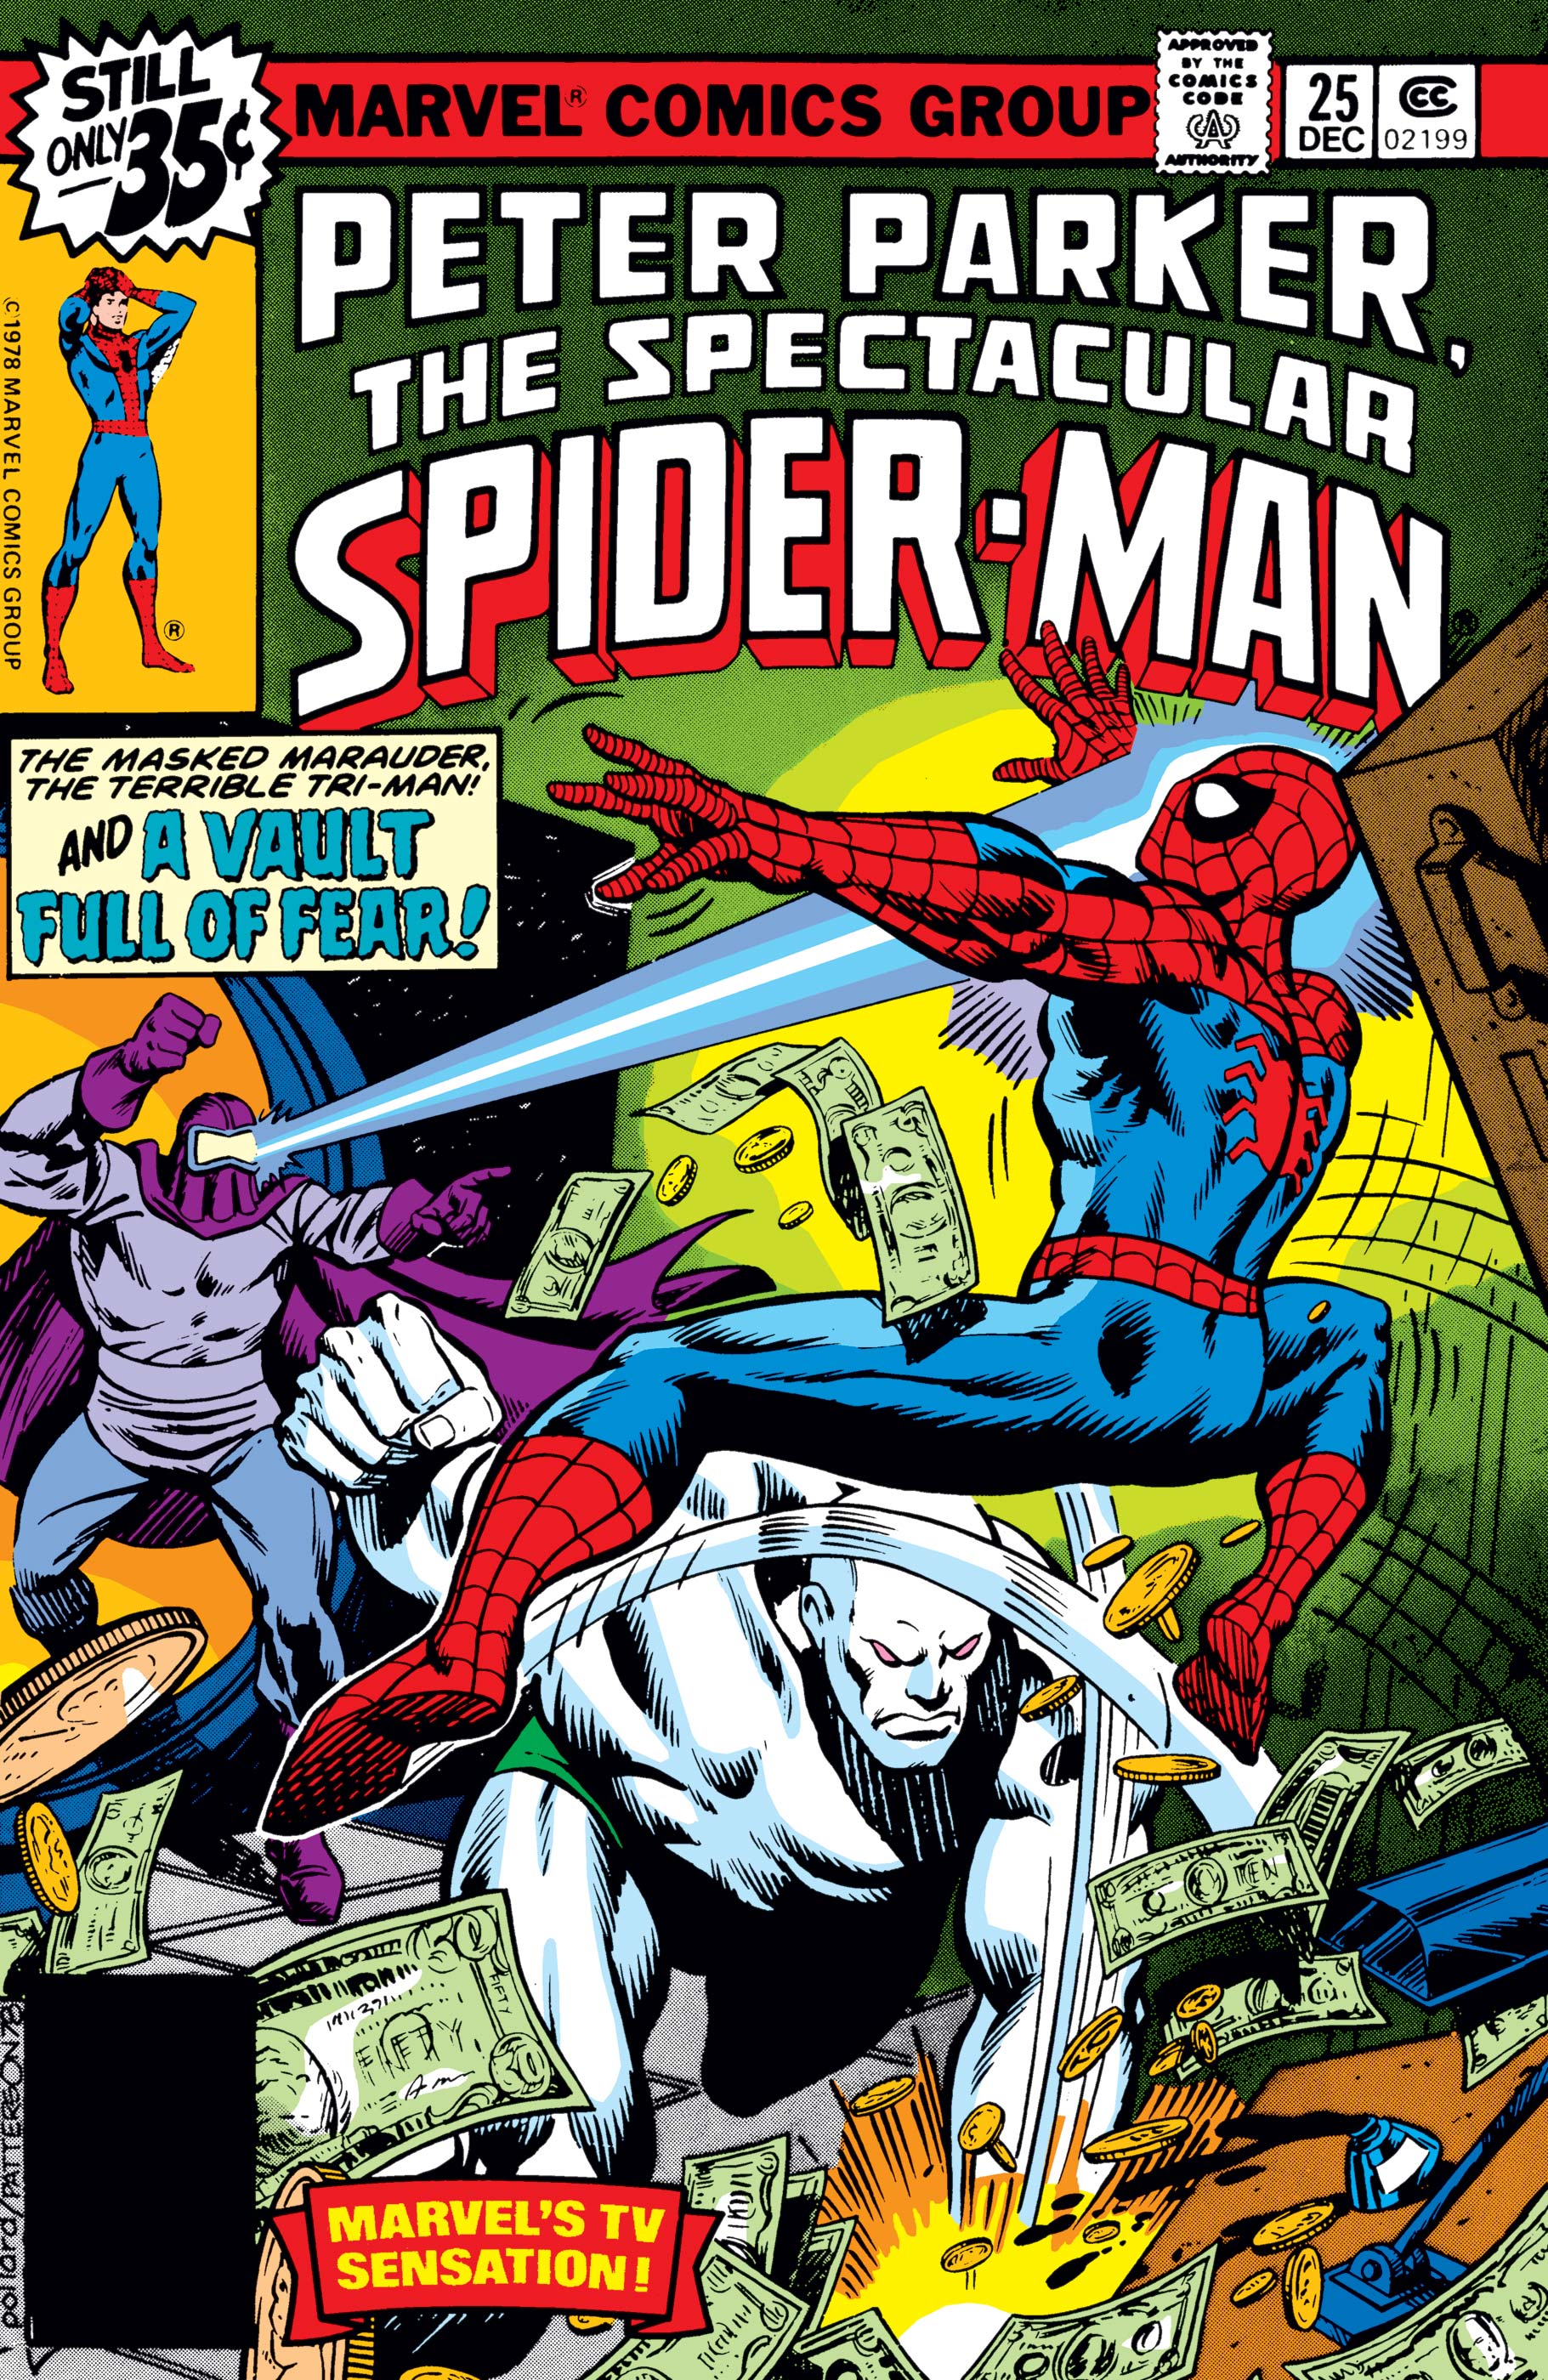 Peter Parker, the Spectacular Spider-Man (1976) #25 | Comic Issues | Marvel